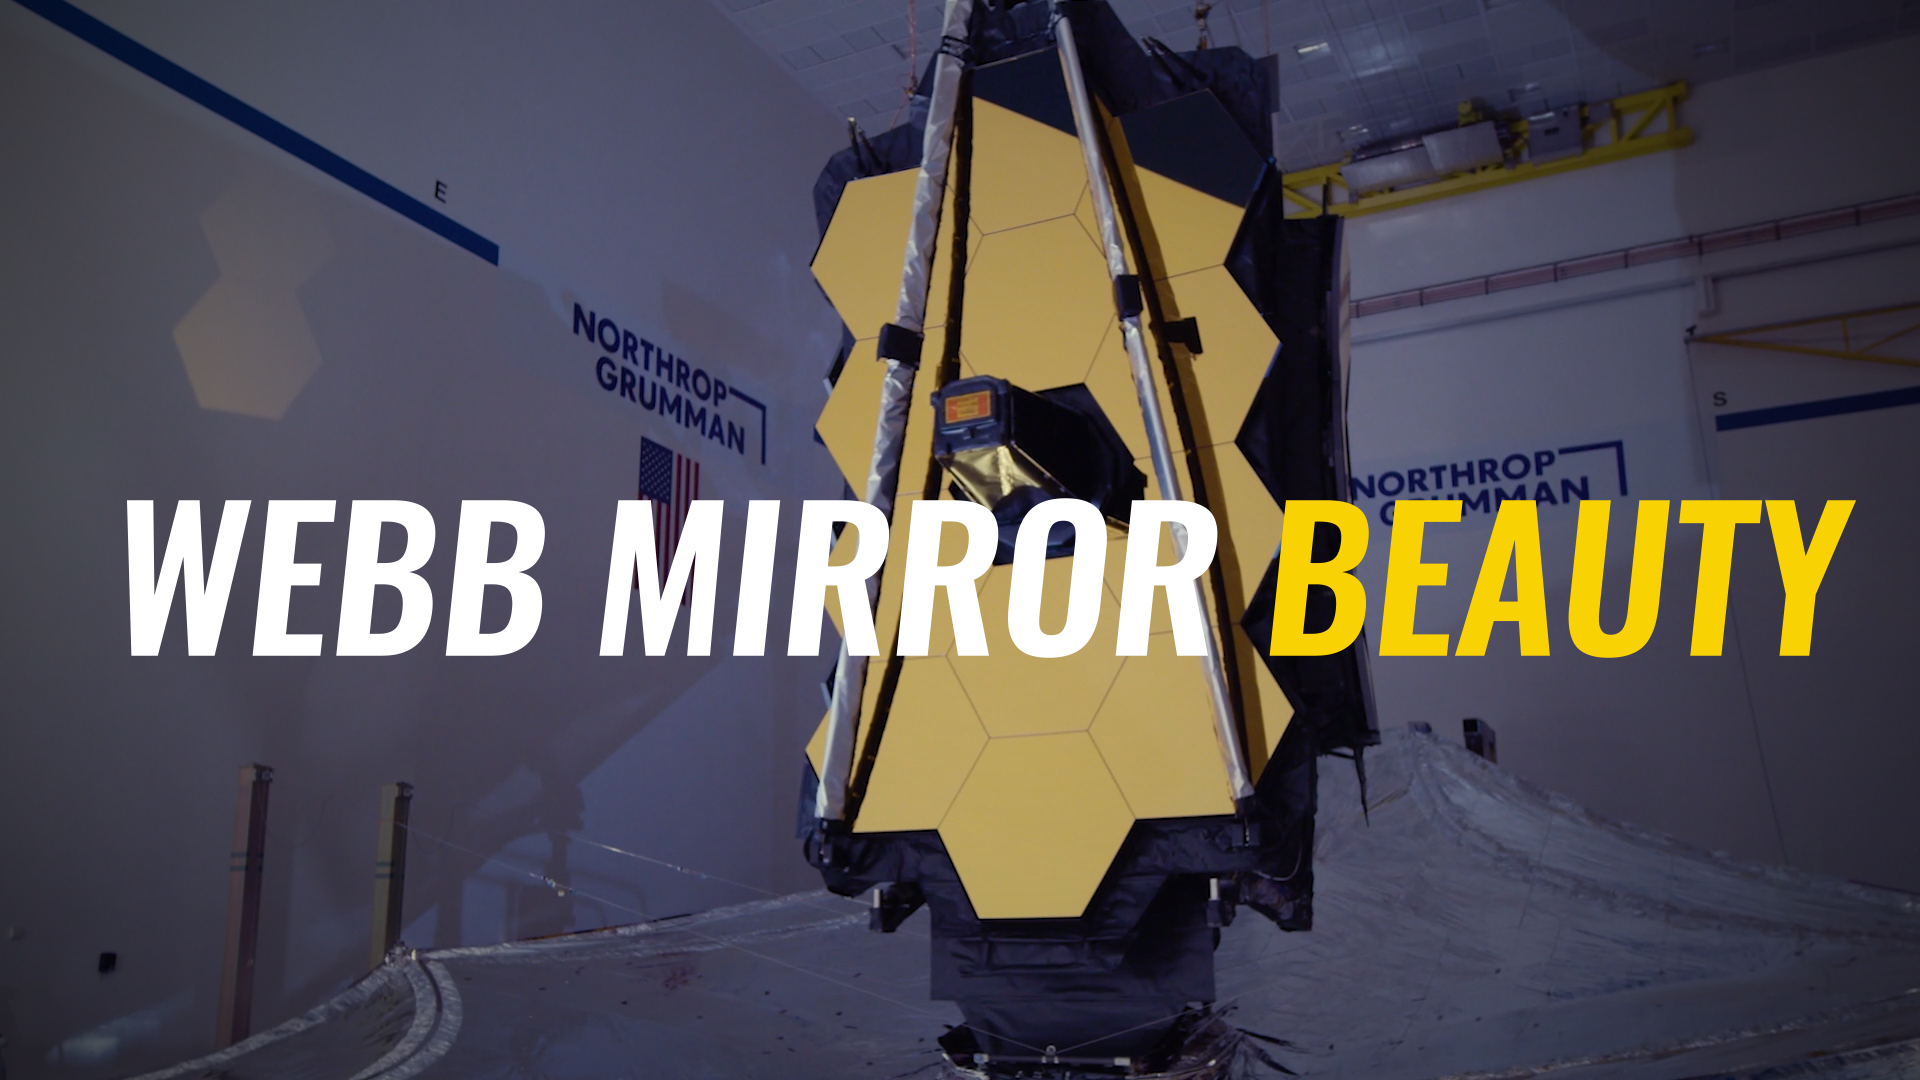 The beauty shot video of the James Webb Space Telescope showing off the telescope's primary mirror.